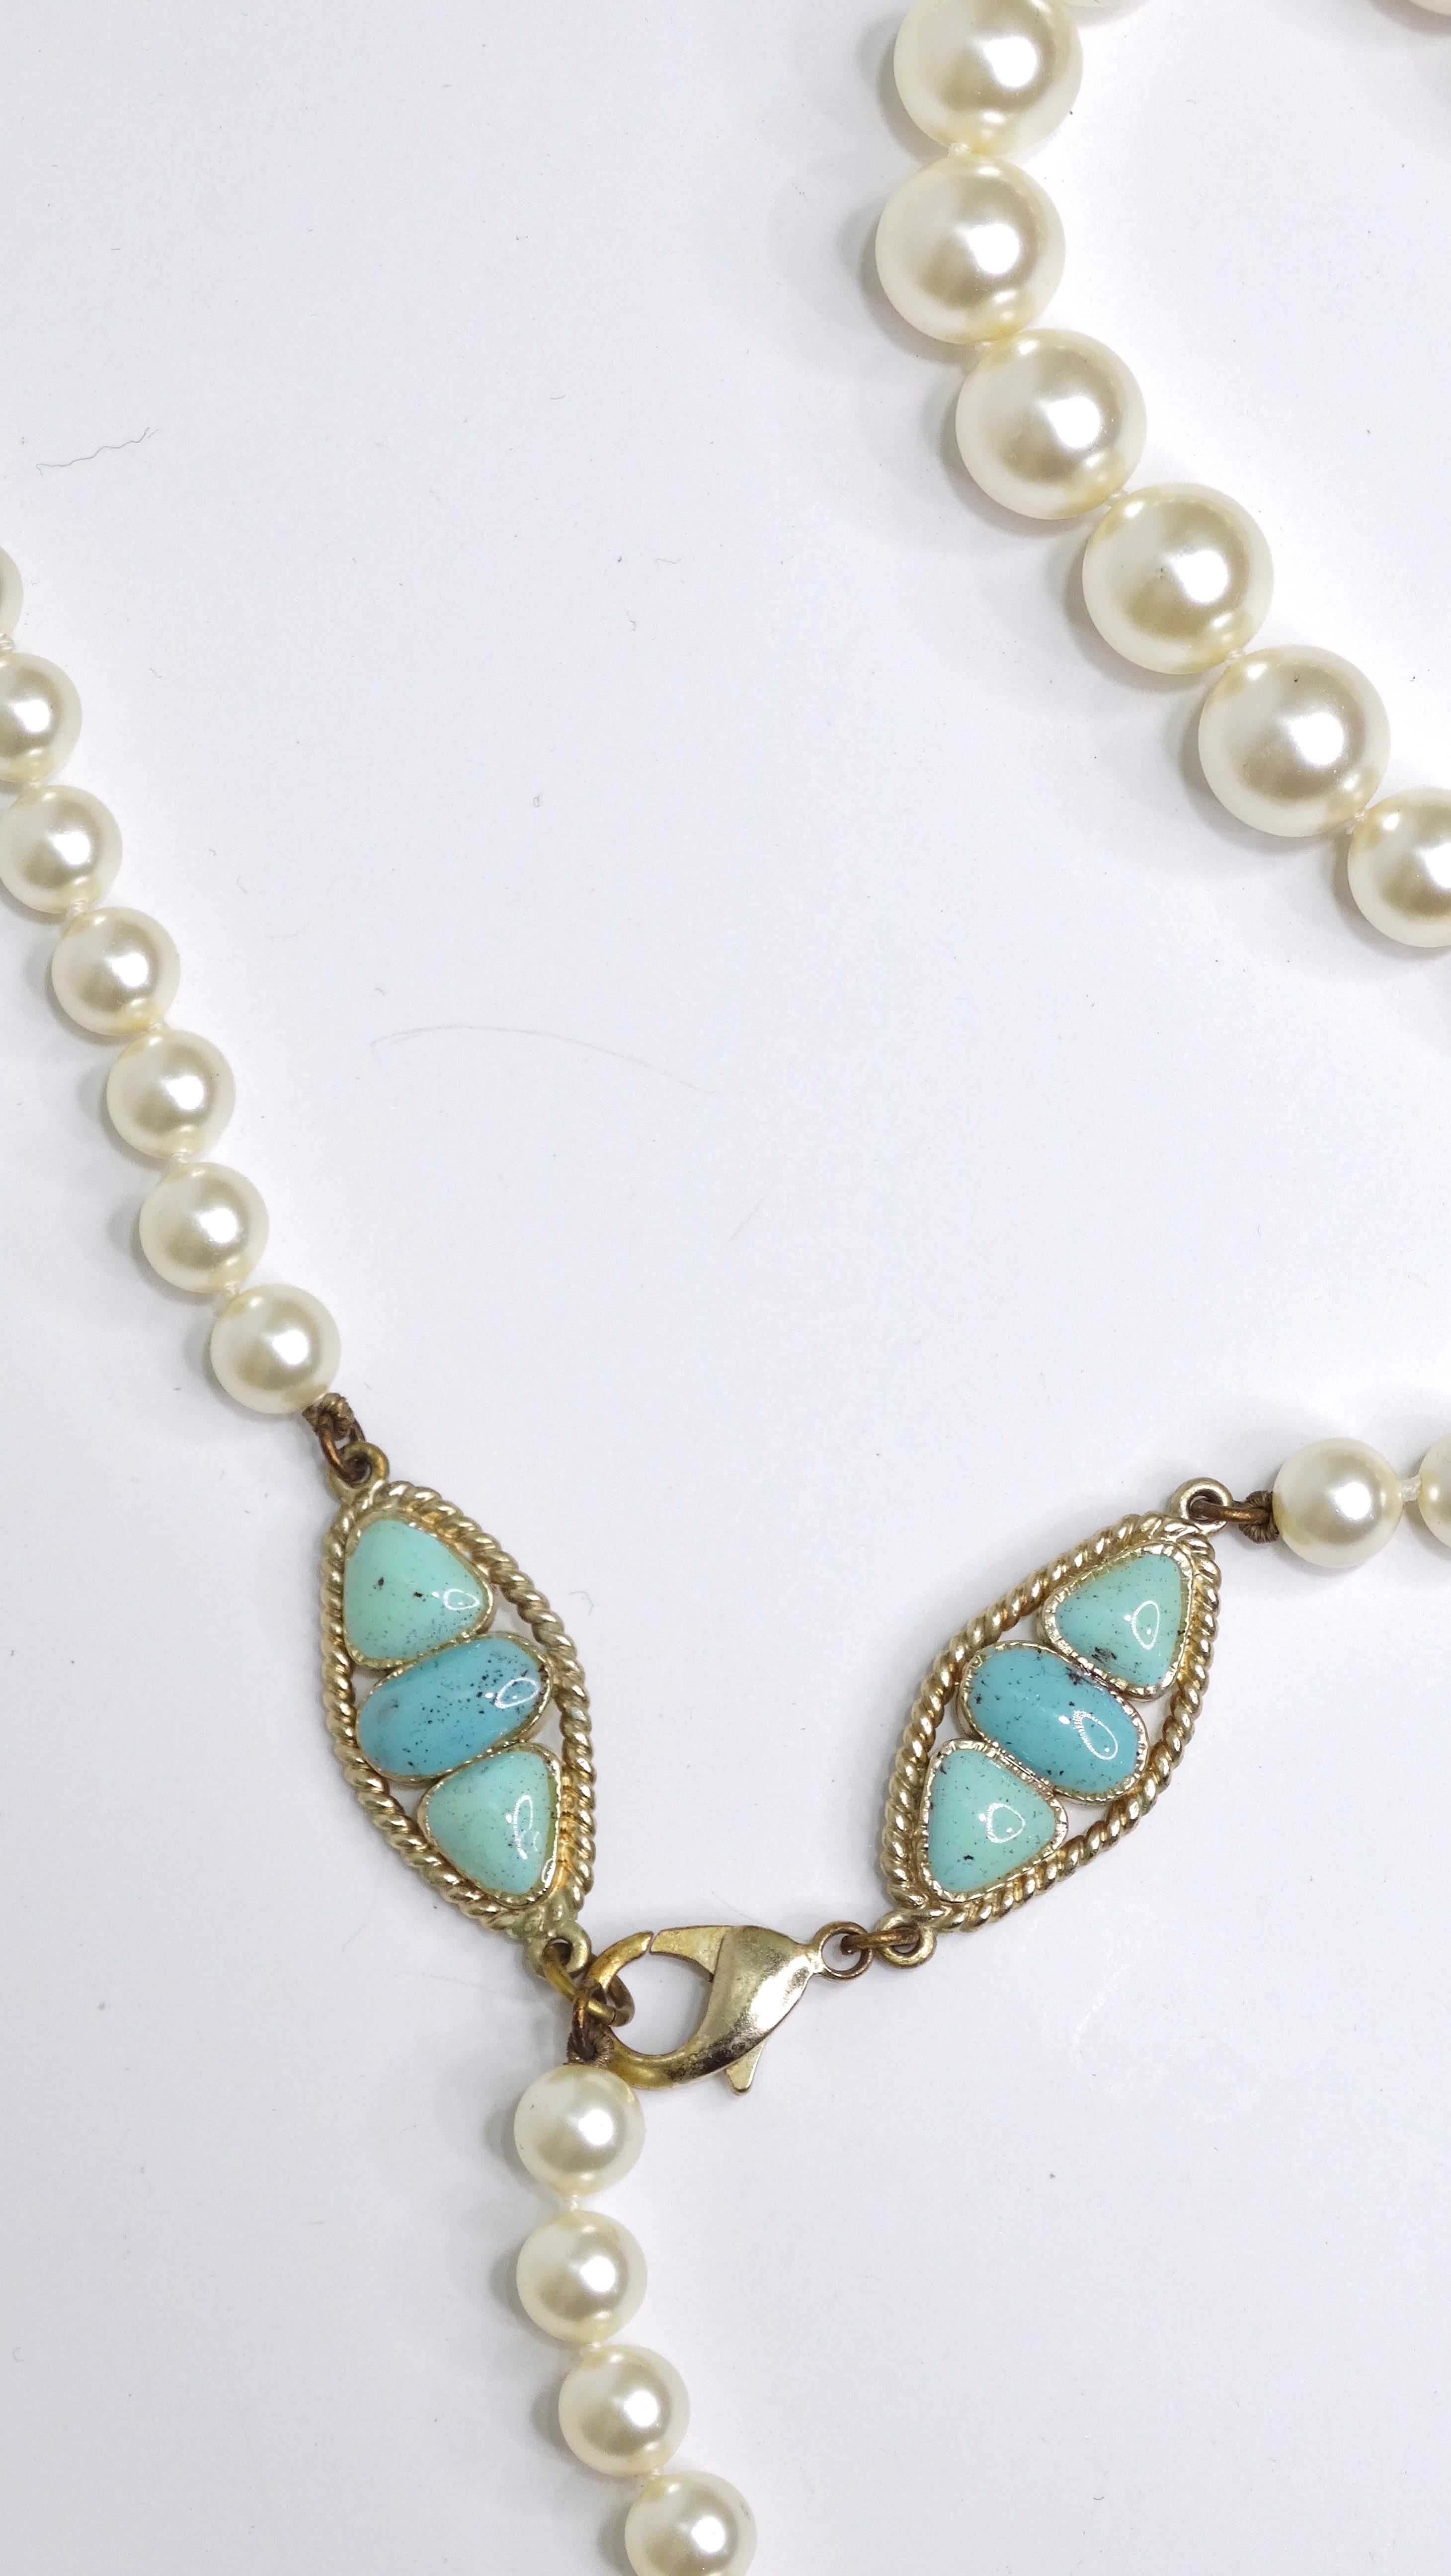 Chanel Paris Dallas Collection White Pearl & Turquoise Necklace 1